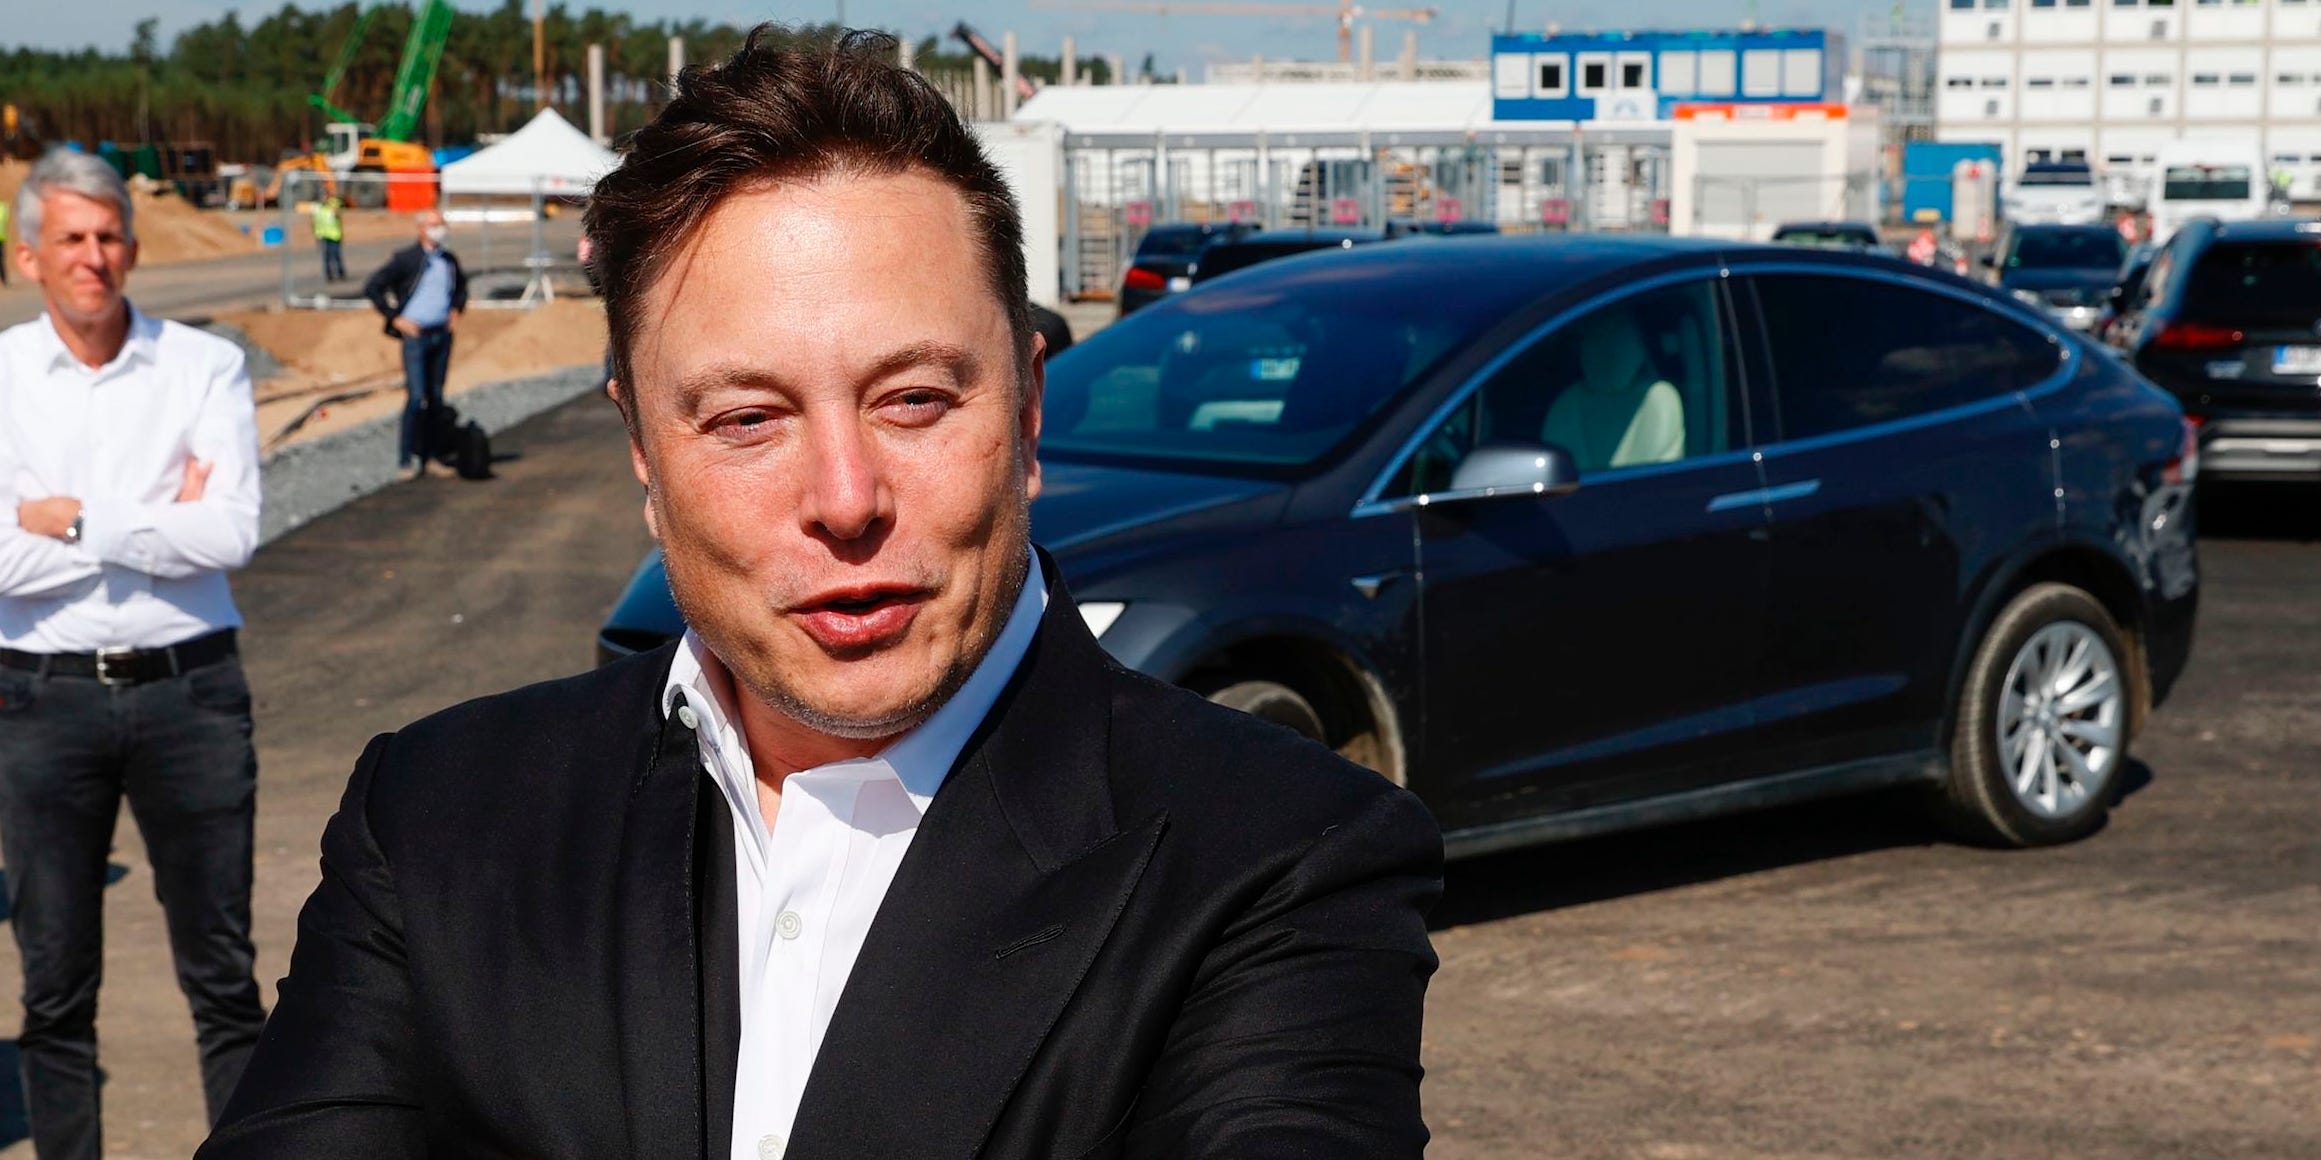 Tesla just missed its goal of delivering half a million vehicles last year